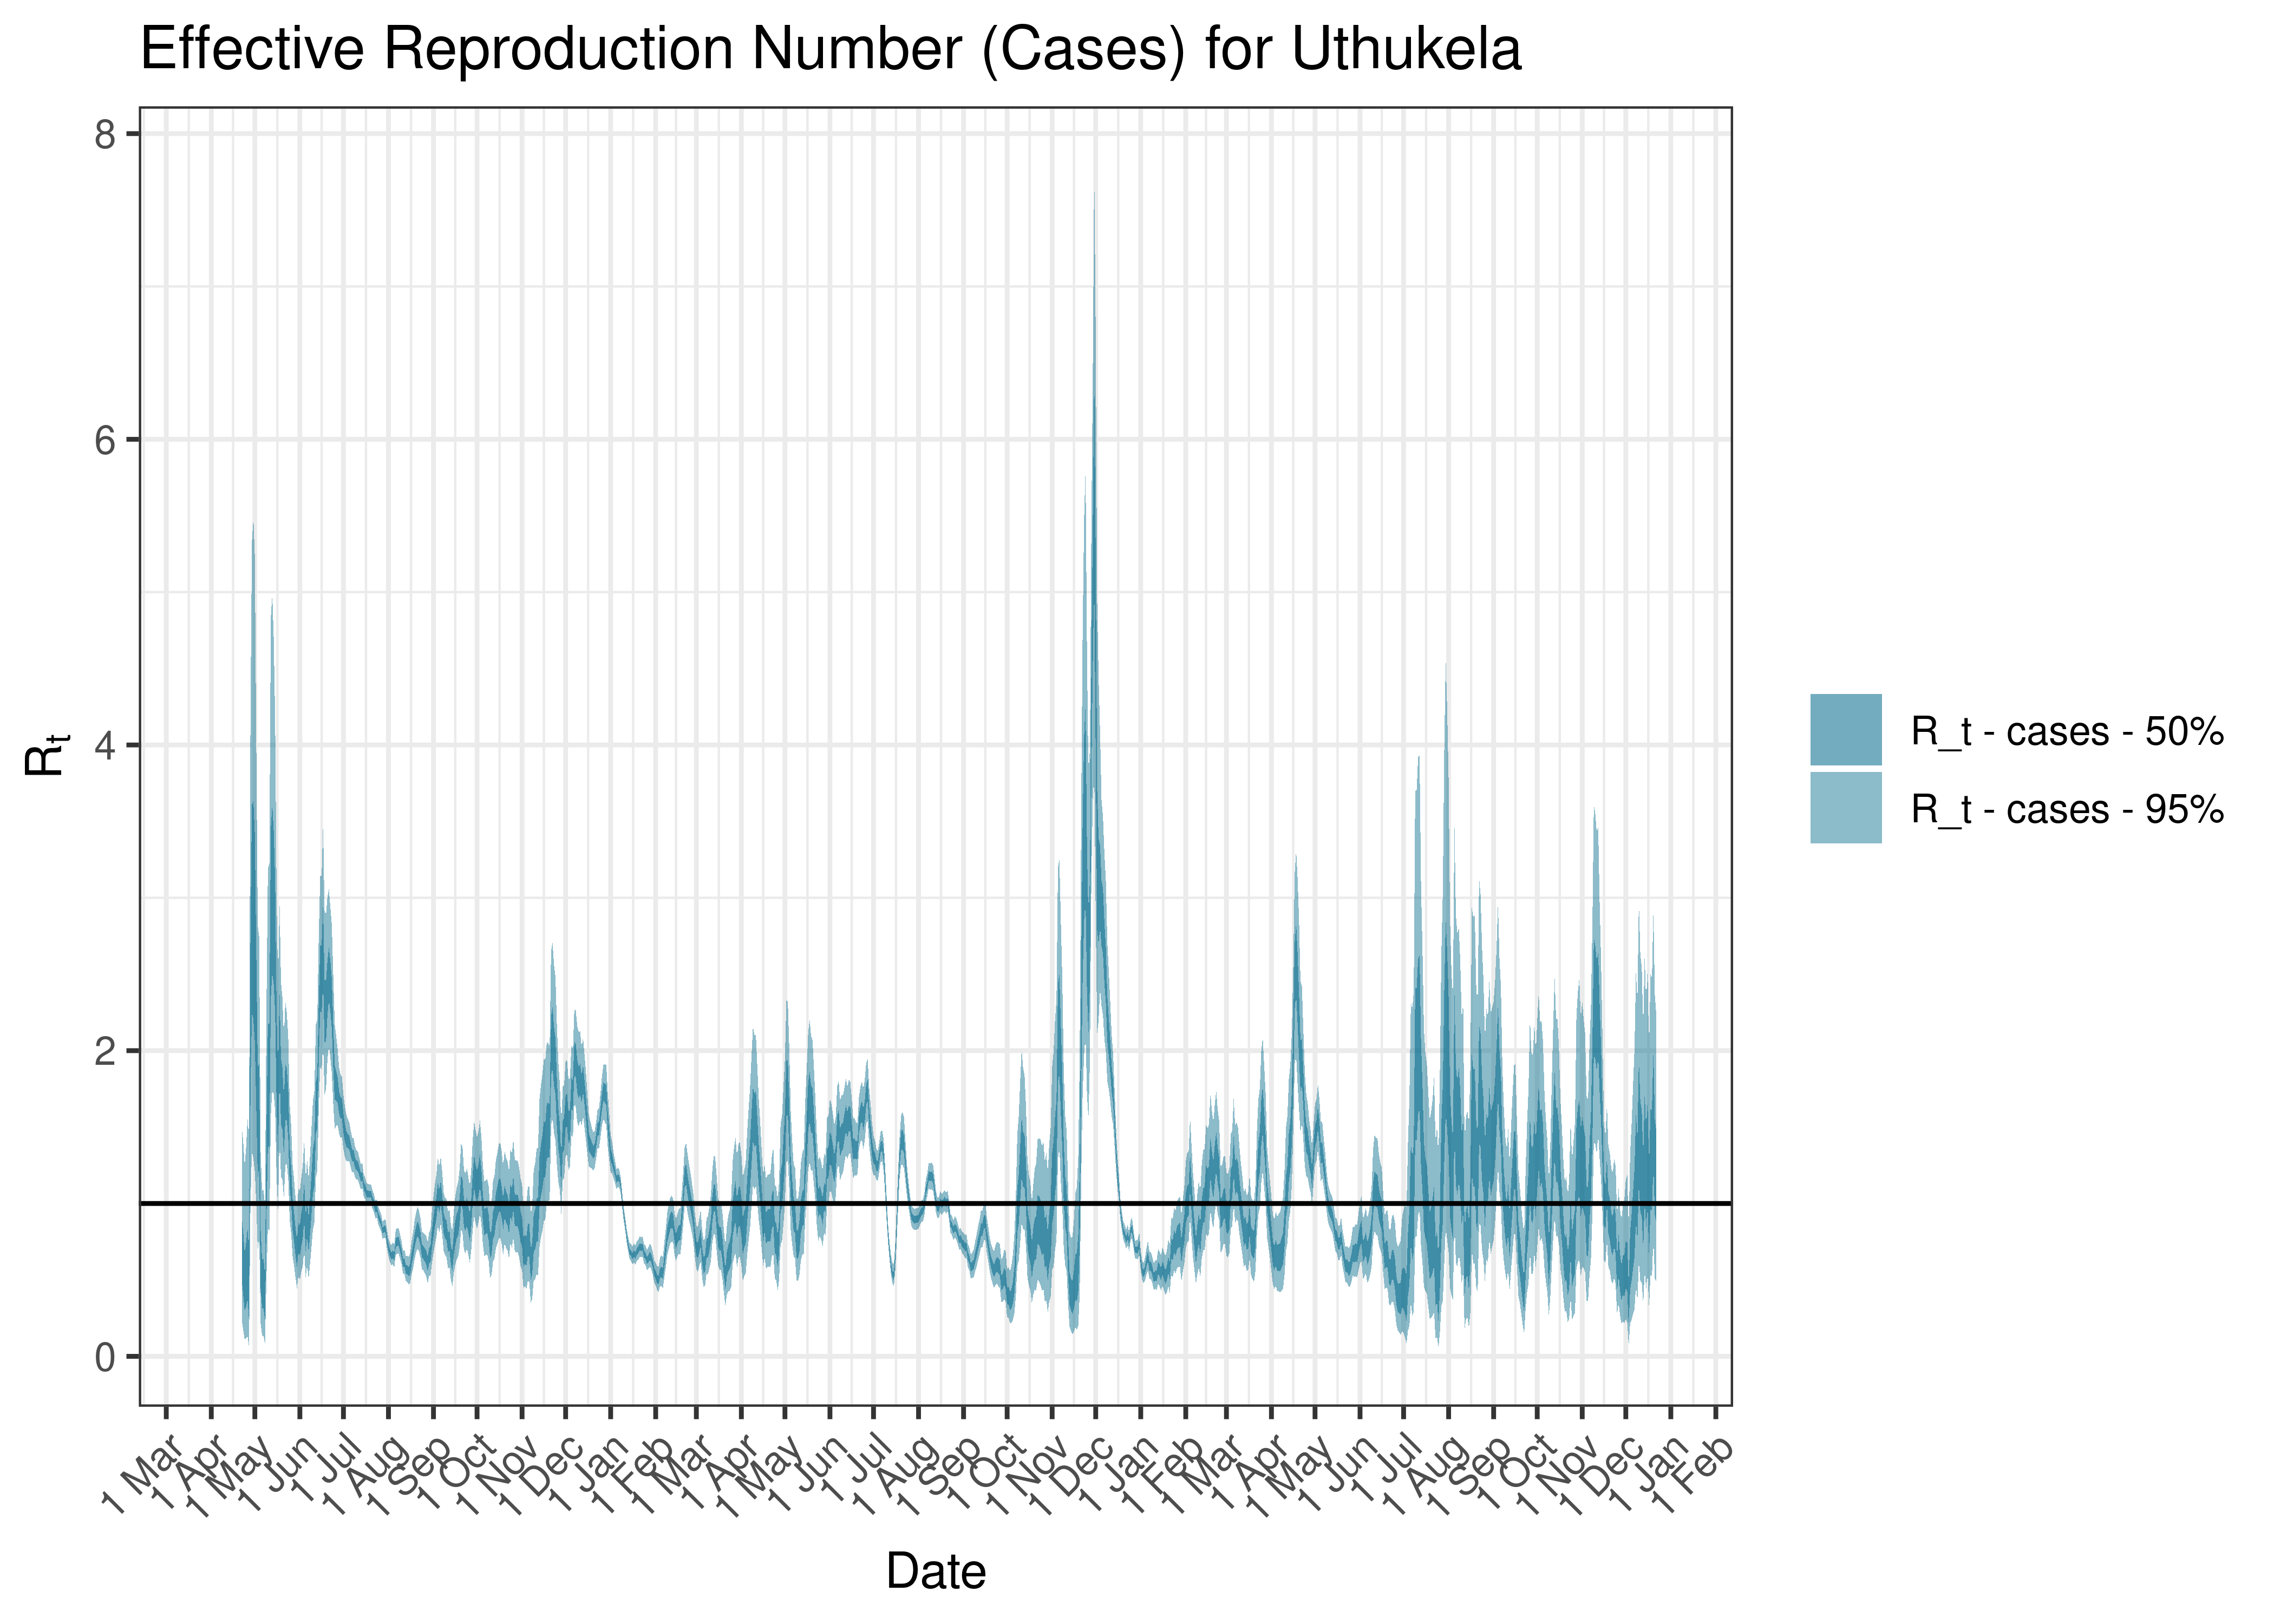 Estimated Effective Reproduction Number Based on Cases for Uthukela since 1 April 2020